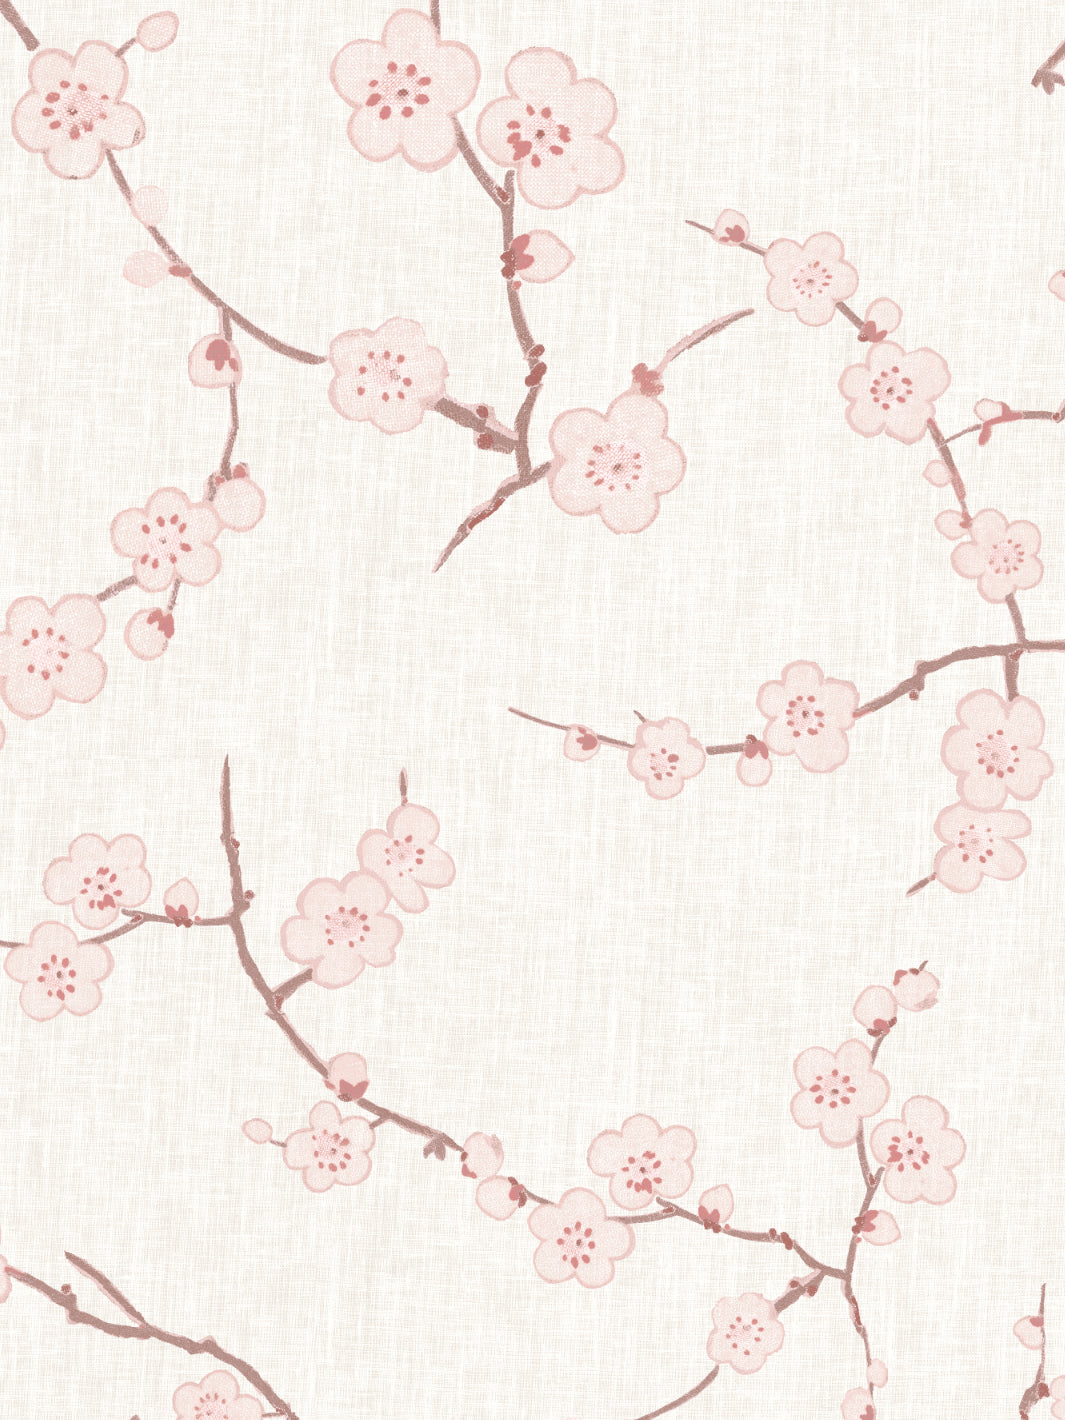 'Cherry Blossom' Wallpaper by Nathan Turner - Pink